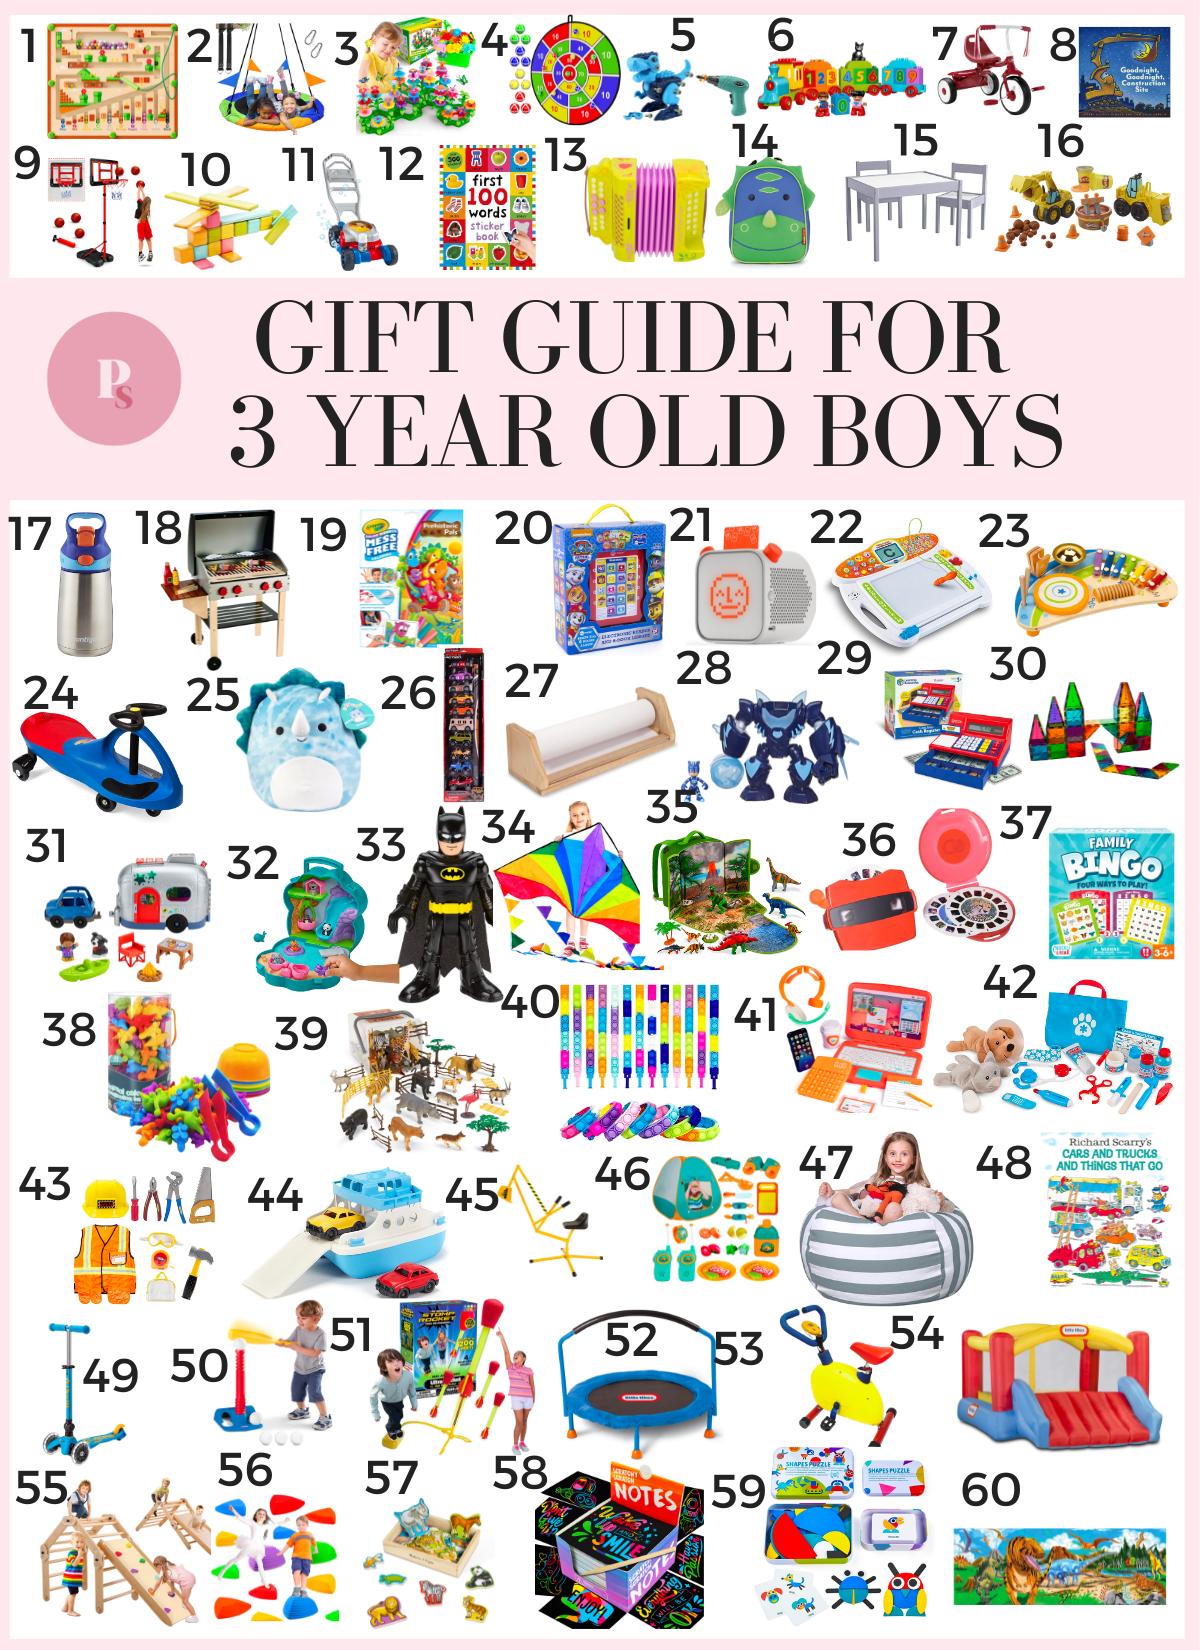 3 year old boys gift guide